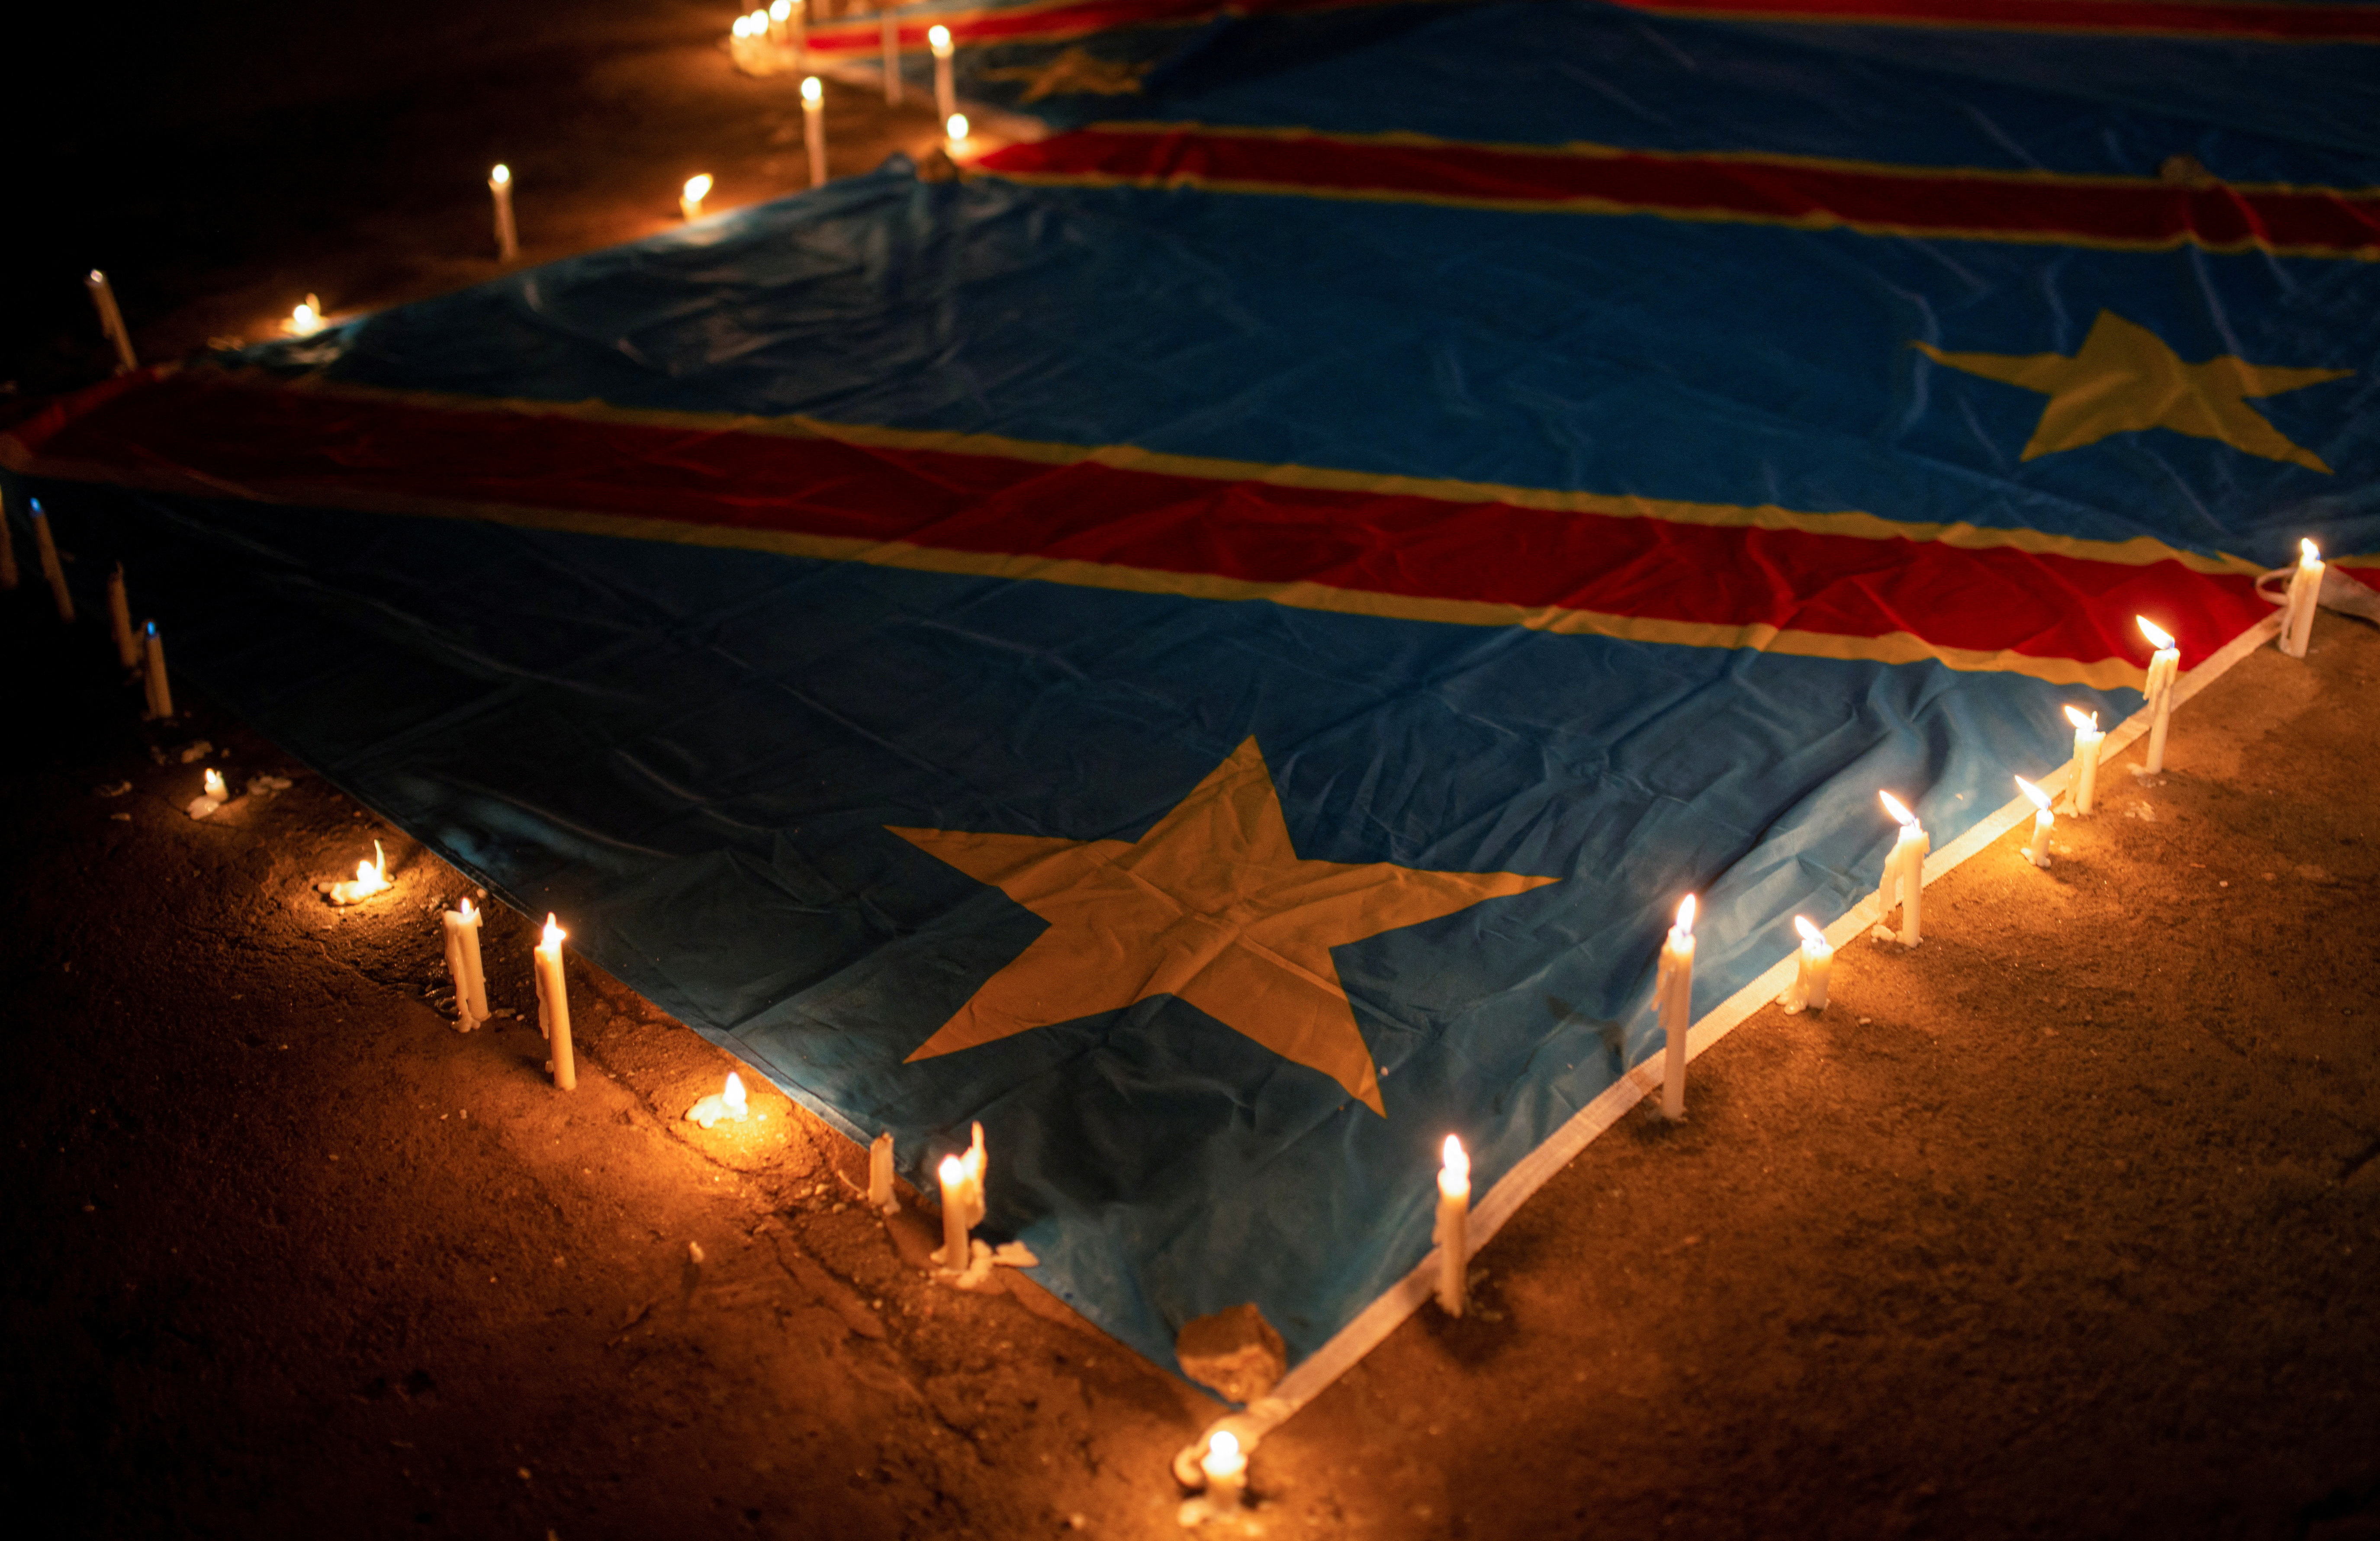 Candles are arranged on a Congolese national flag during a vigil in memory of the civilians killed in the recent conflict between FARDC and rebel forces, in Goma